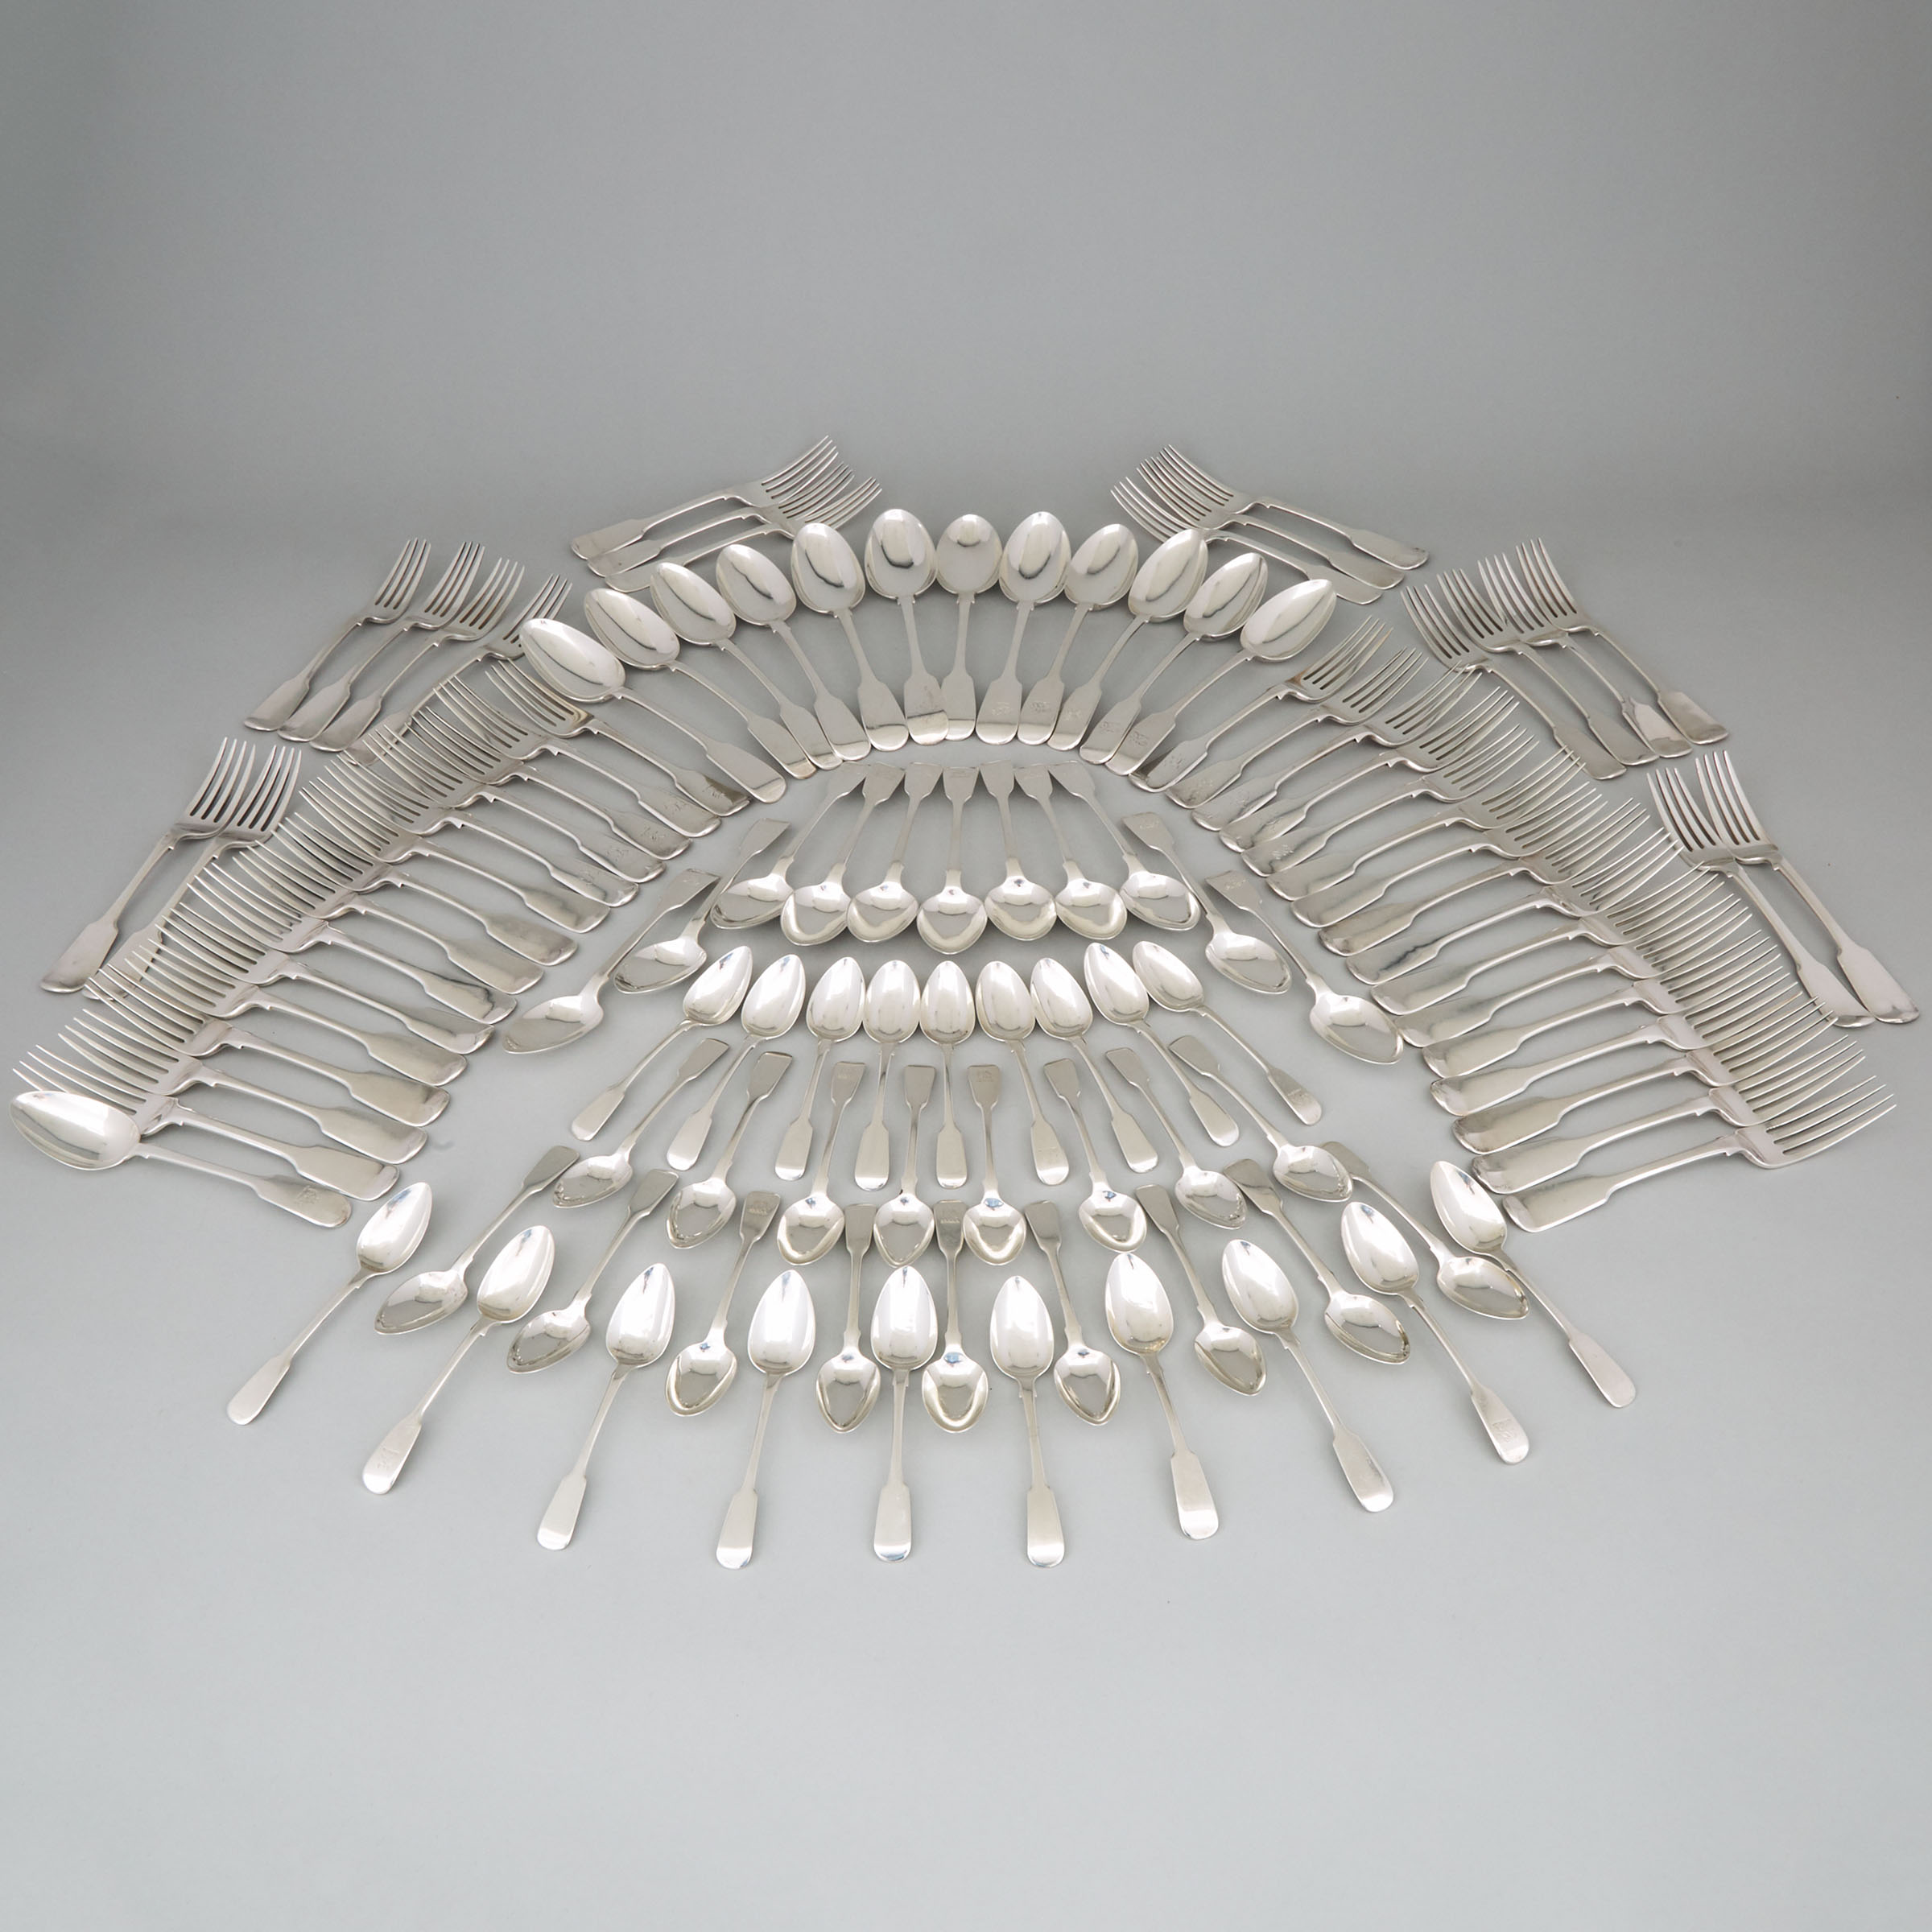 Group of Georgian and Victorian Silver Fiddle Pattern Flatware, 19th century